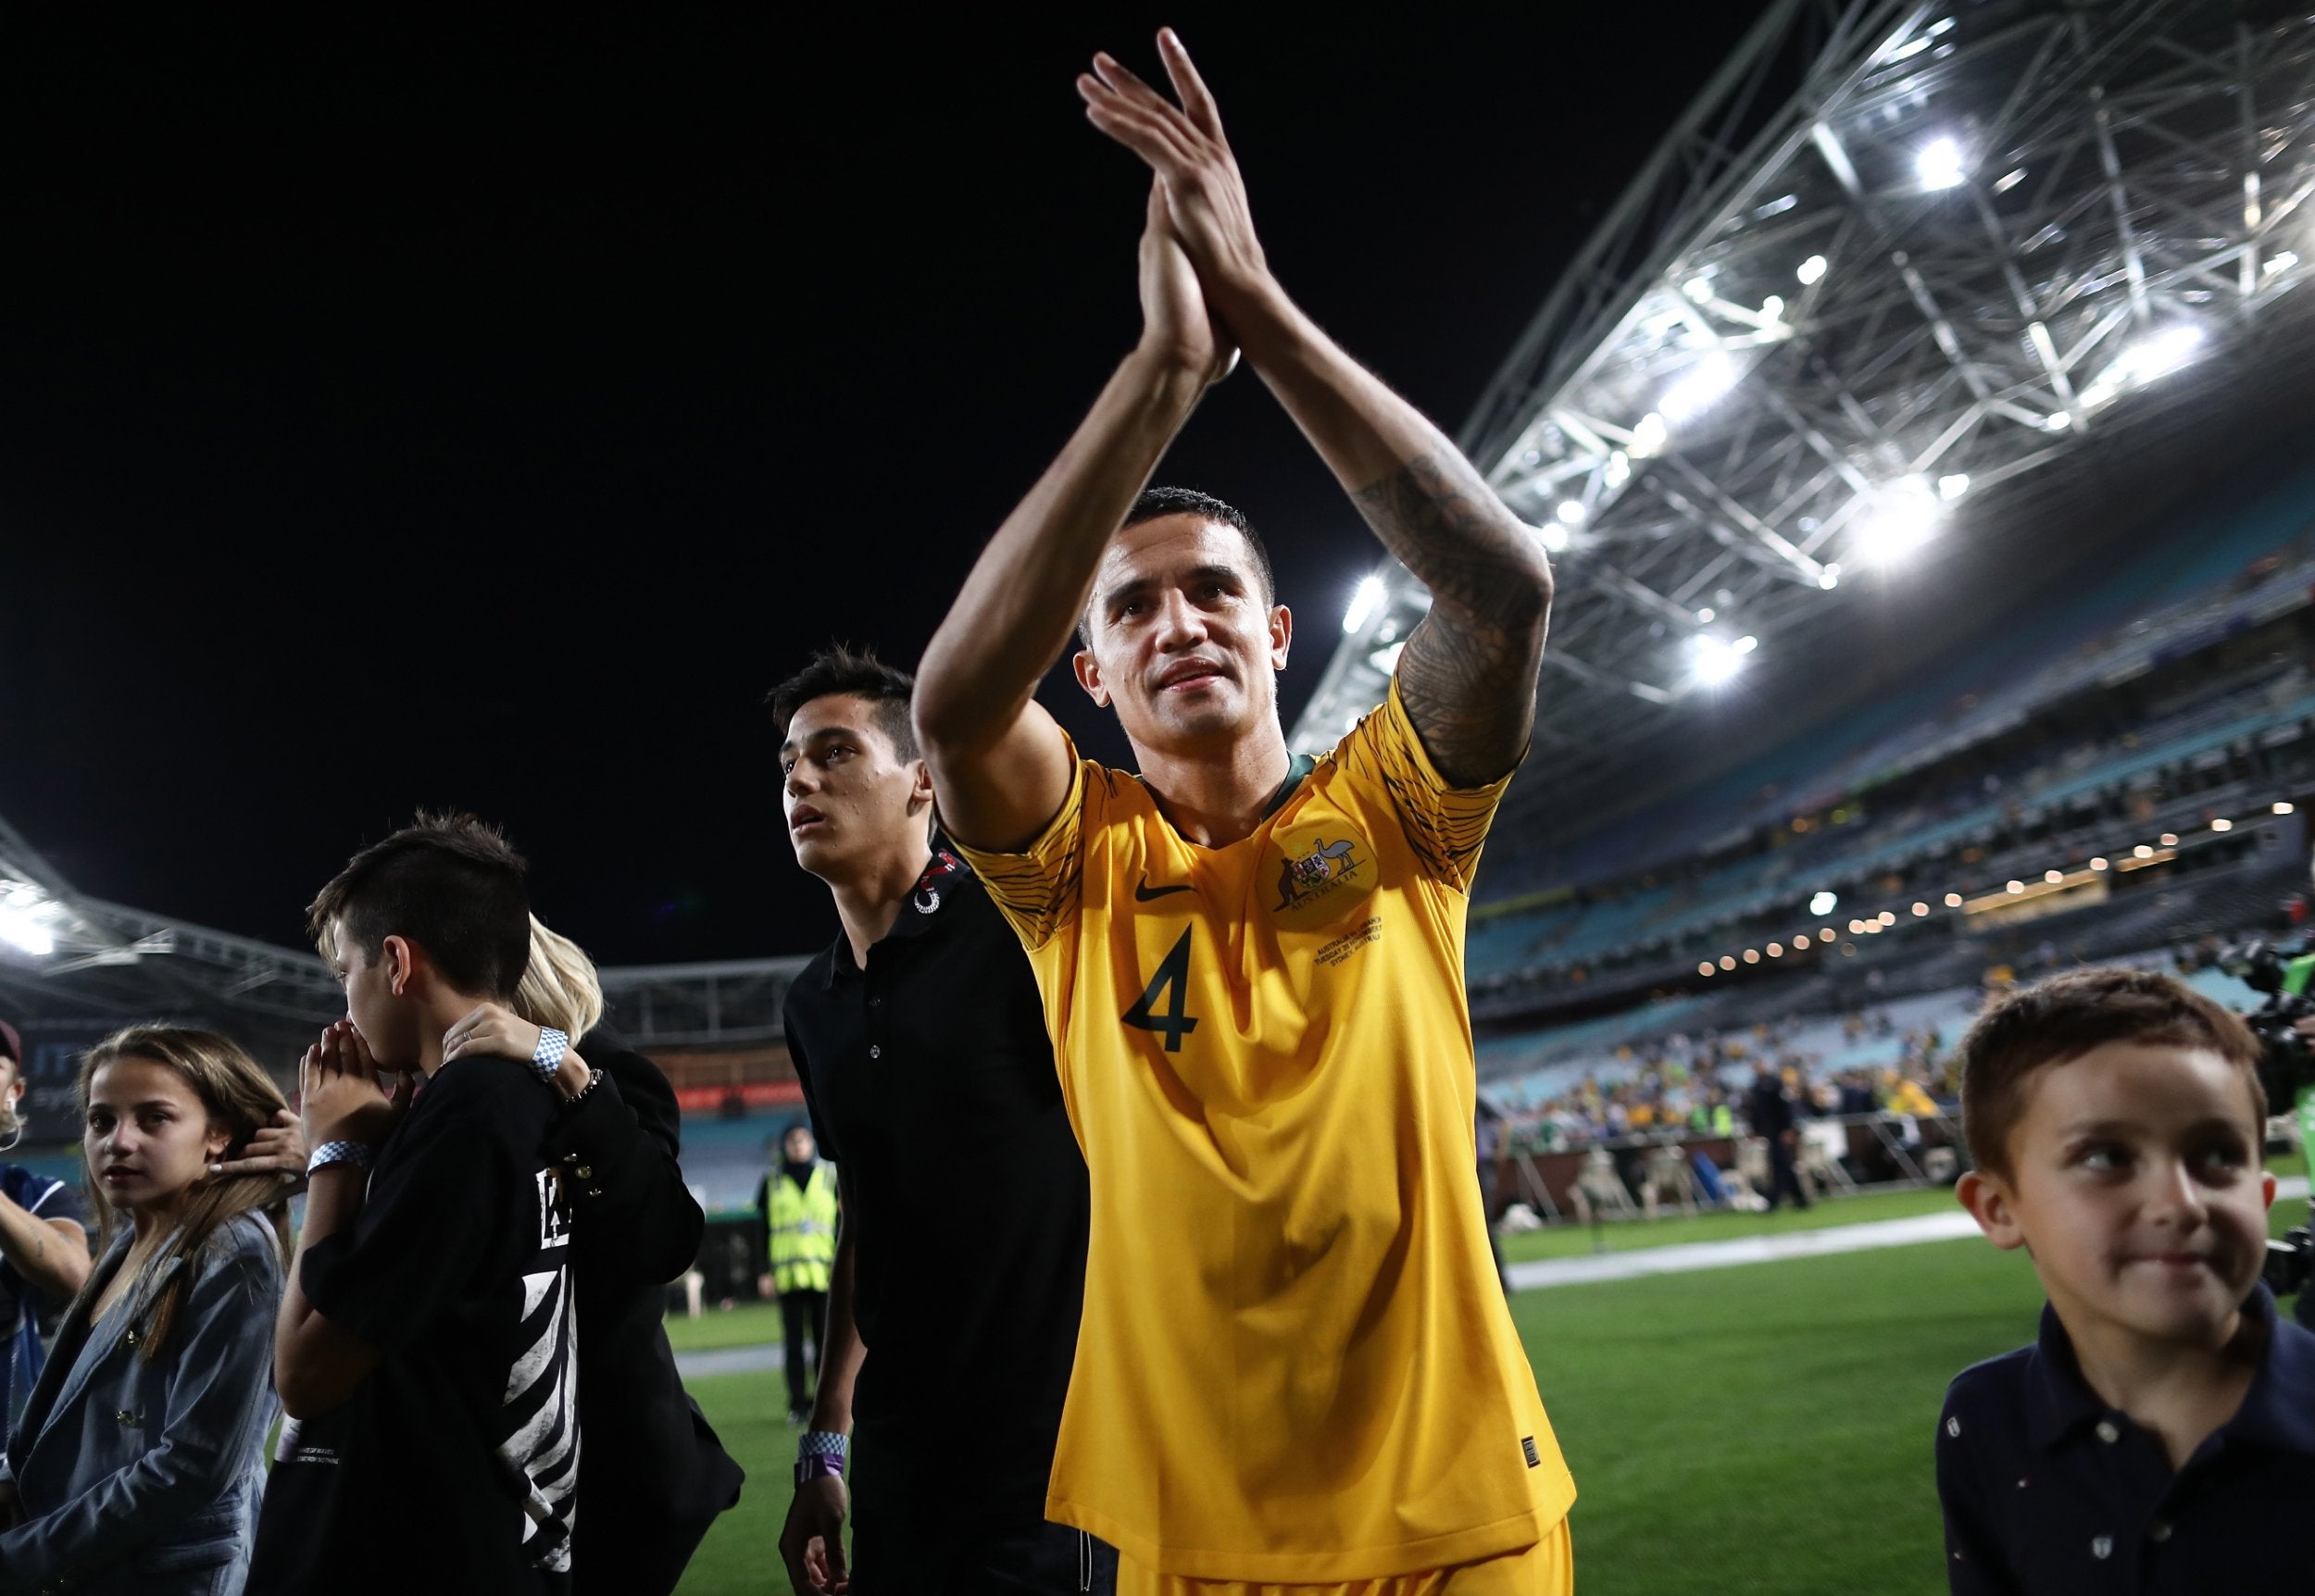 Cahill called it a day after a talismanic career with the Socceroos